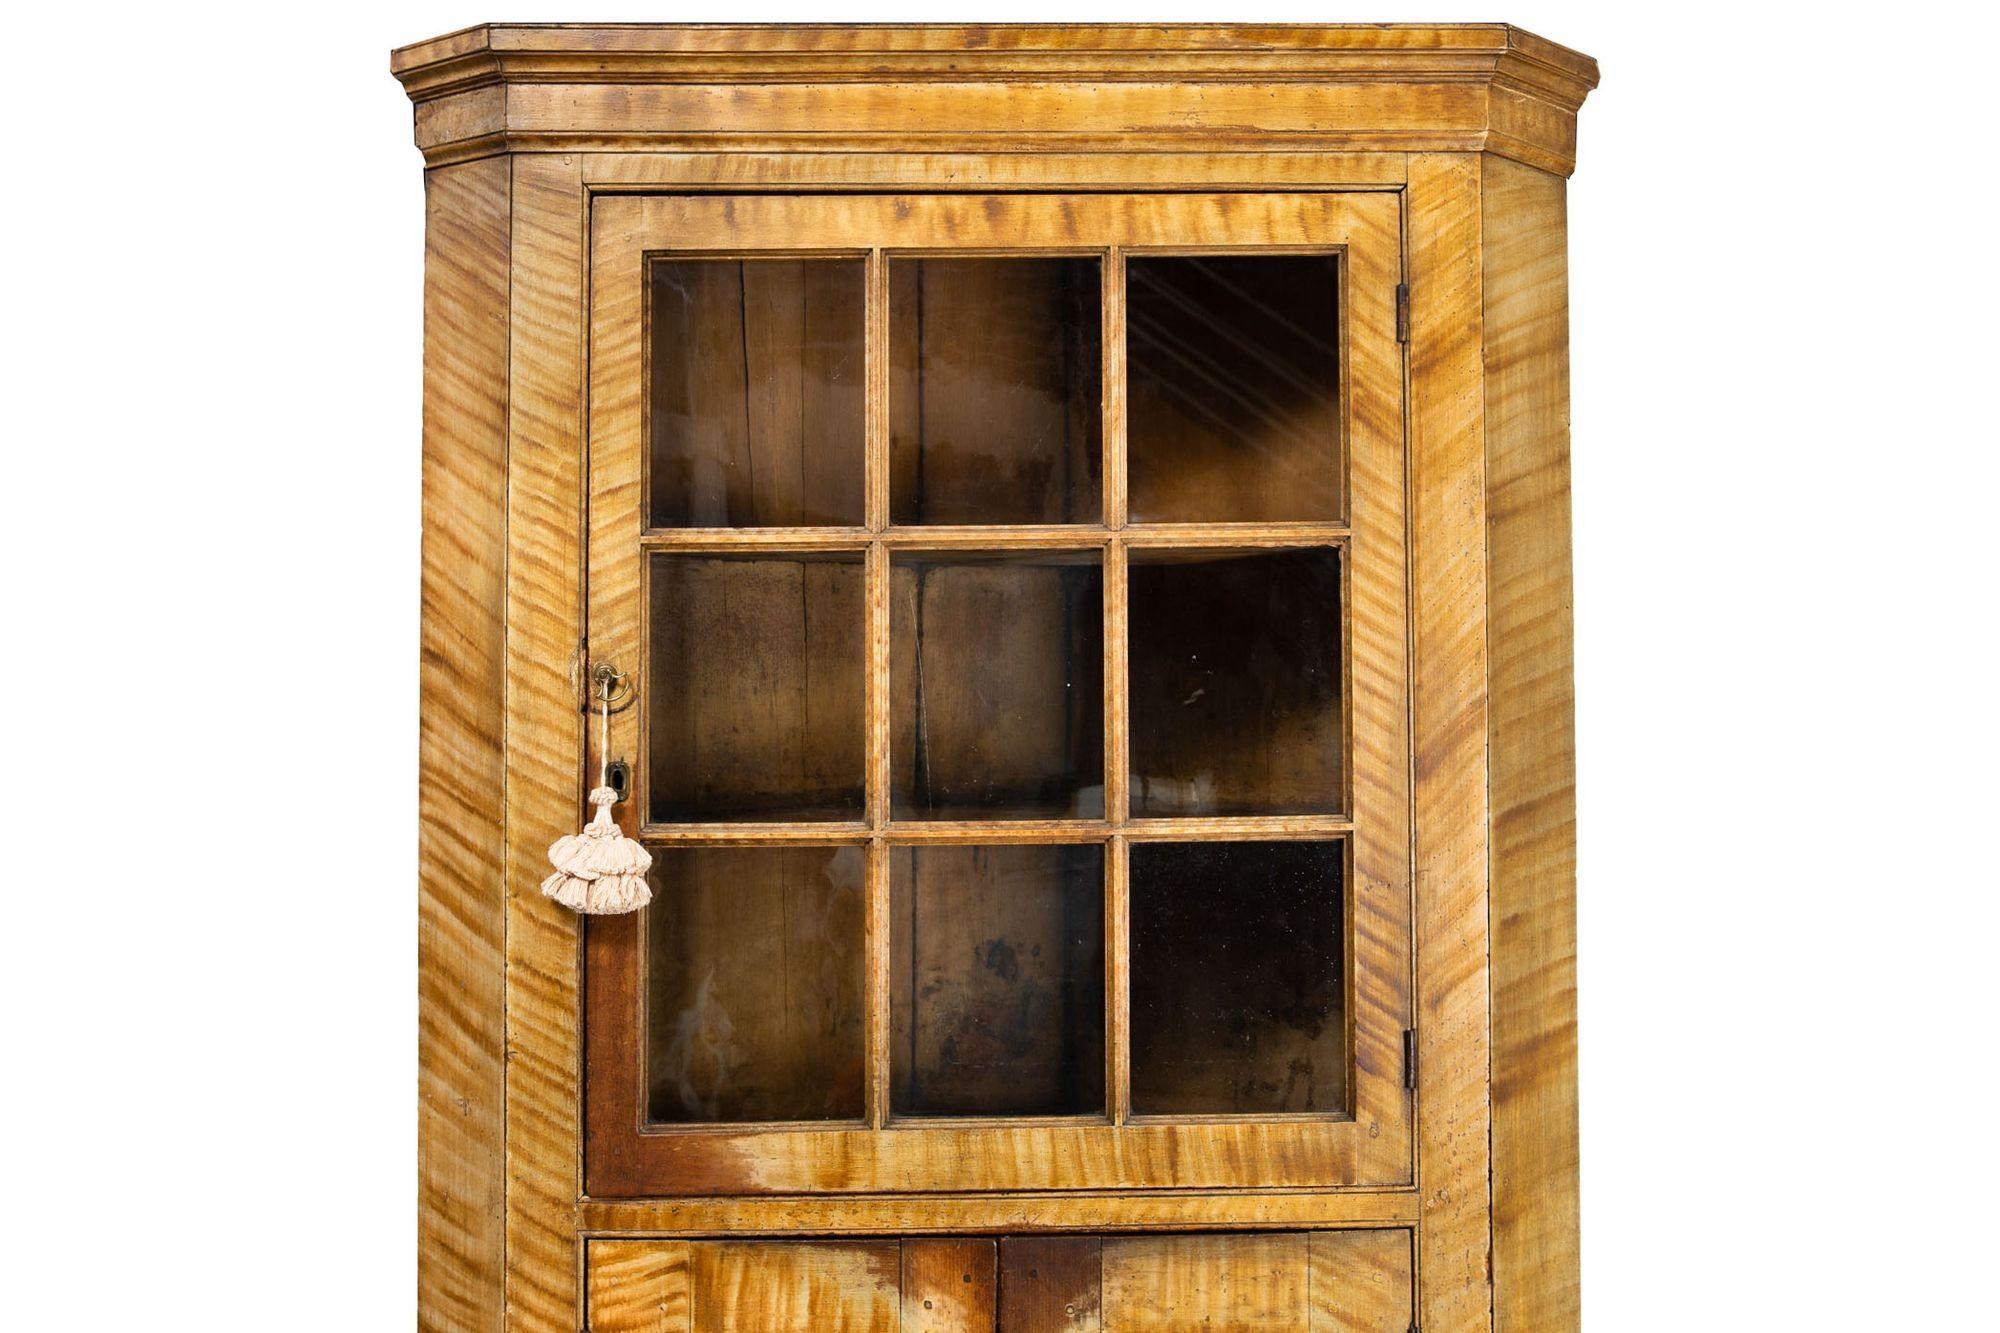 American Grain-Painted Corner Cabinet Cupboard, New England, circa 1805 In Good Condition For Sale In Shippensburg, PA